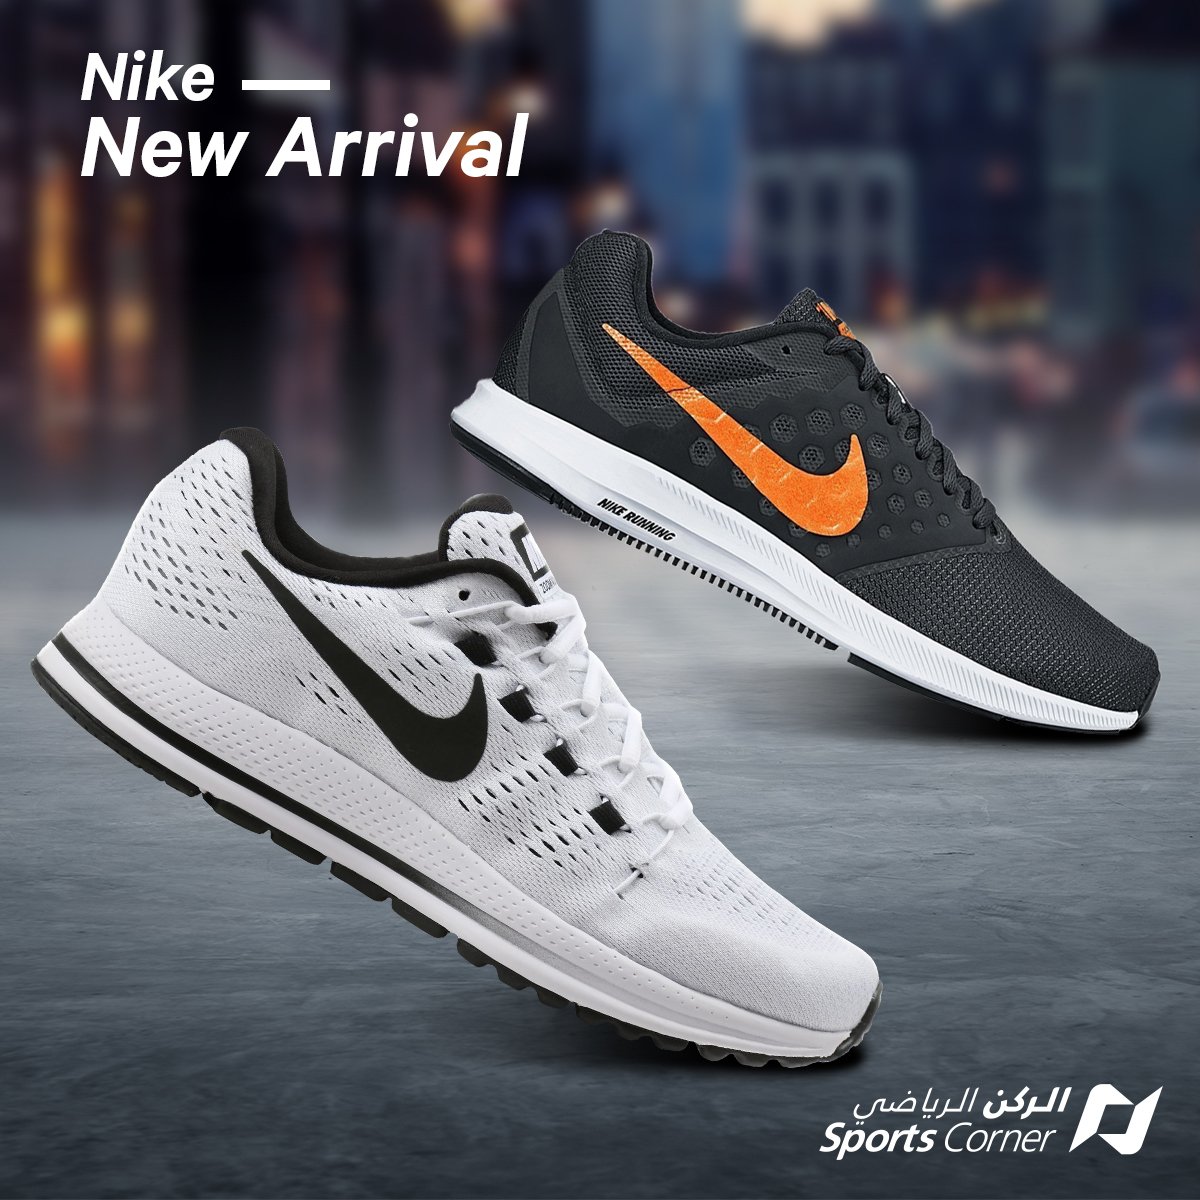 Sports Corner on Twitter: "Feel free &amp; comfy in every you make with the latest new arrivals from #Nike https://t.co/Q7hBpQuT2I" Twitter